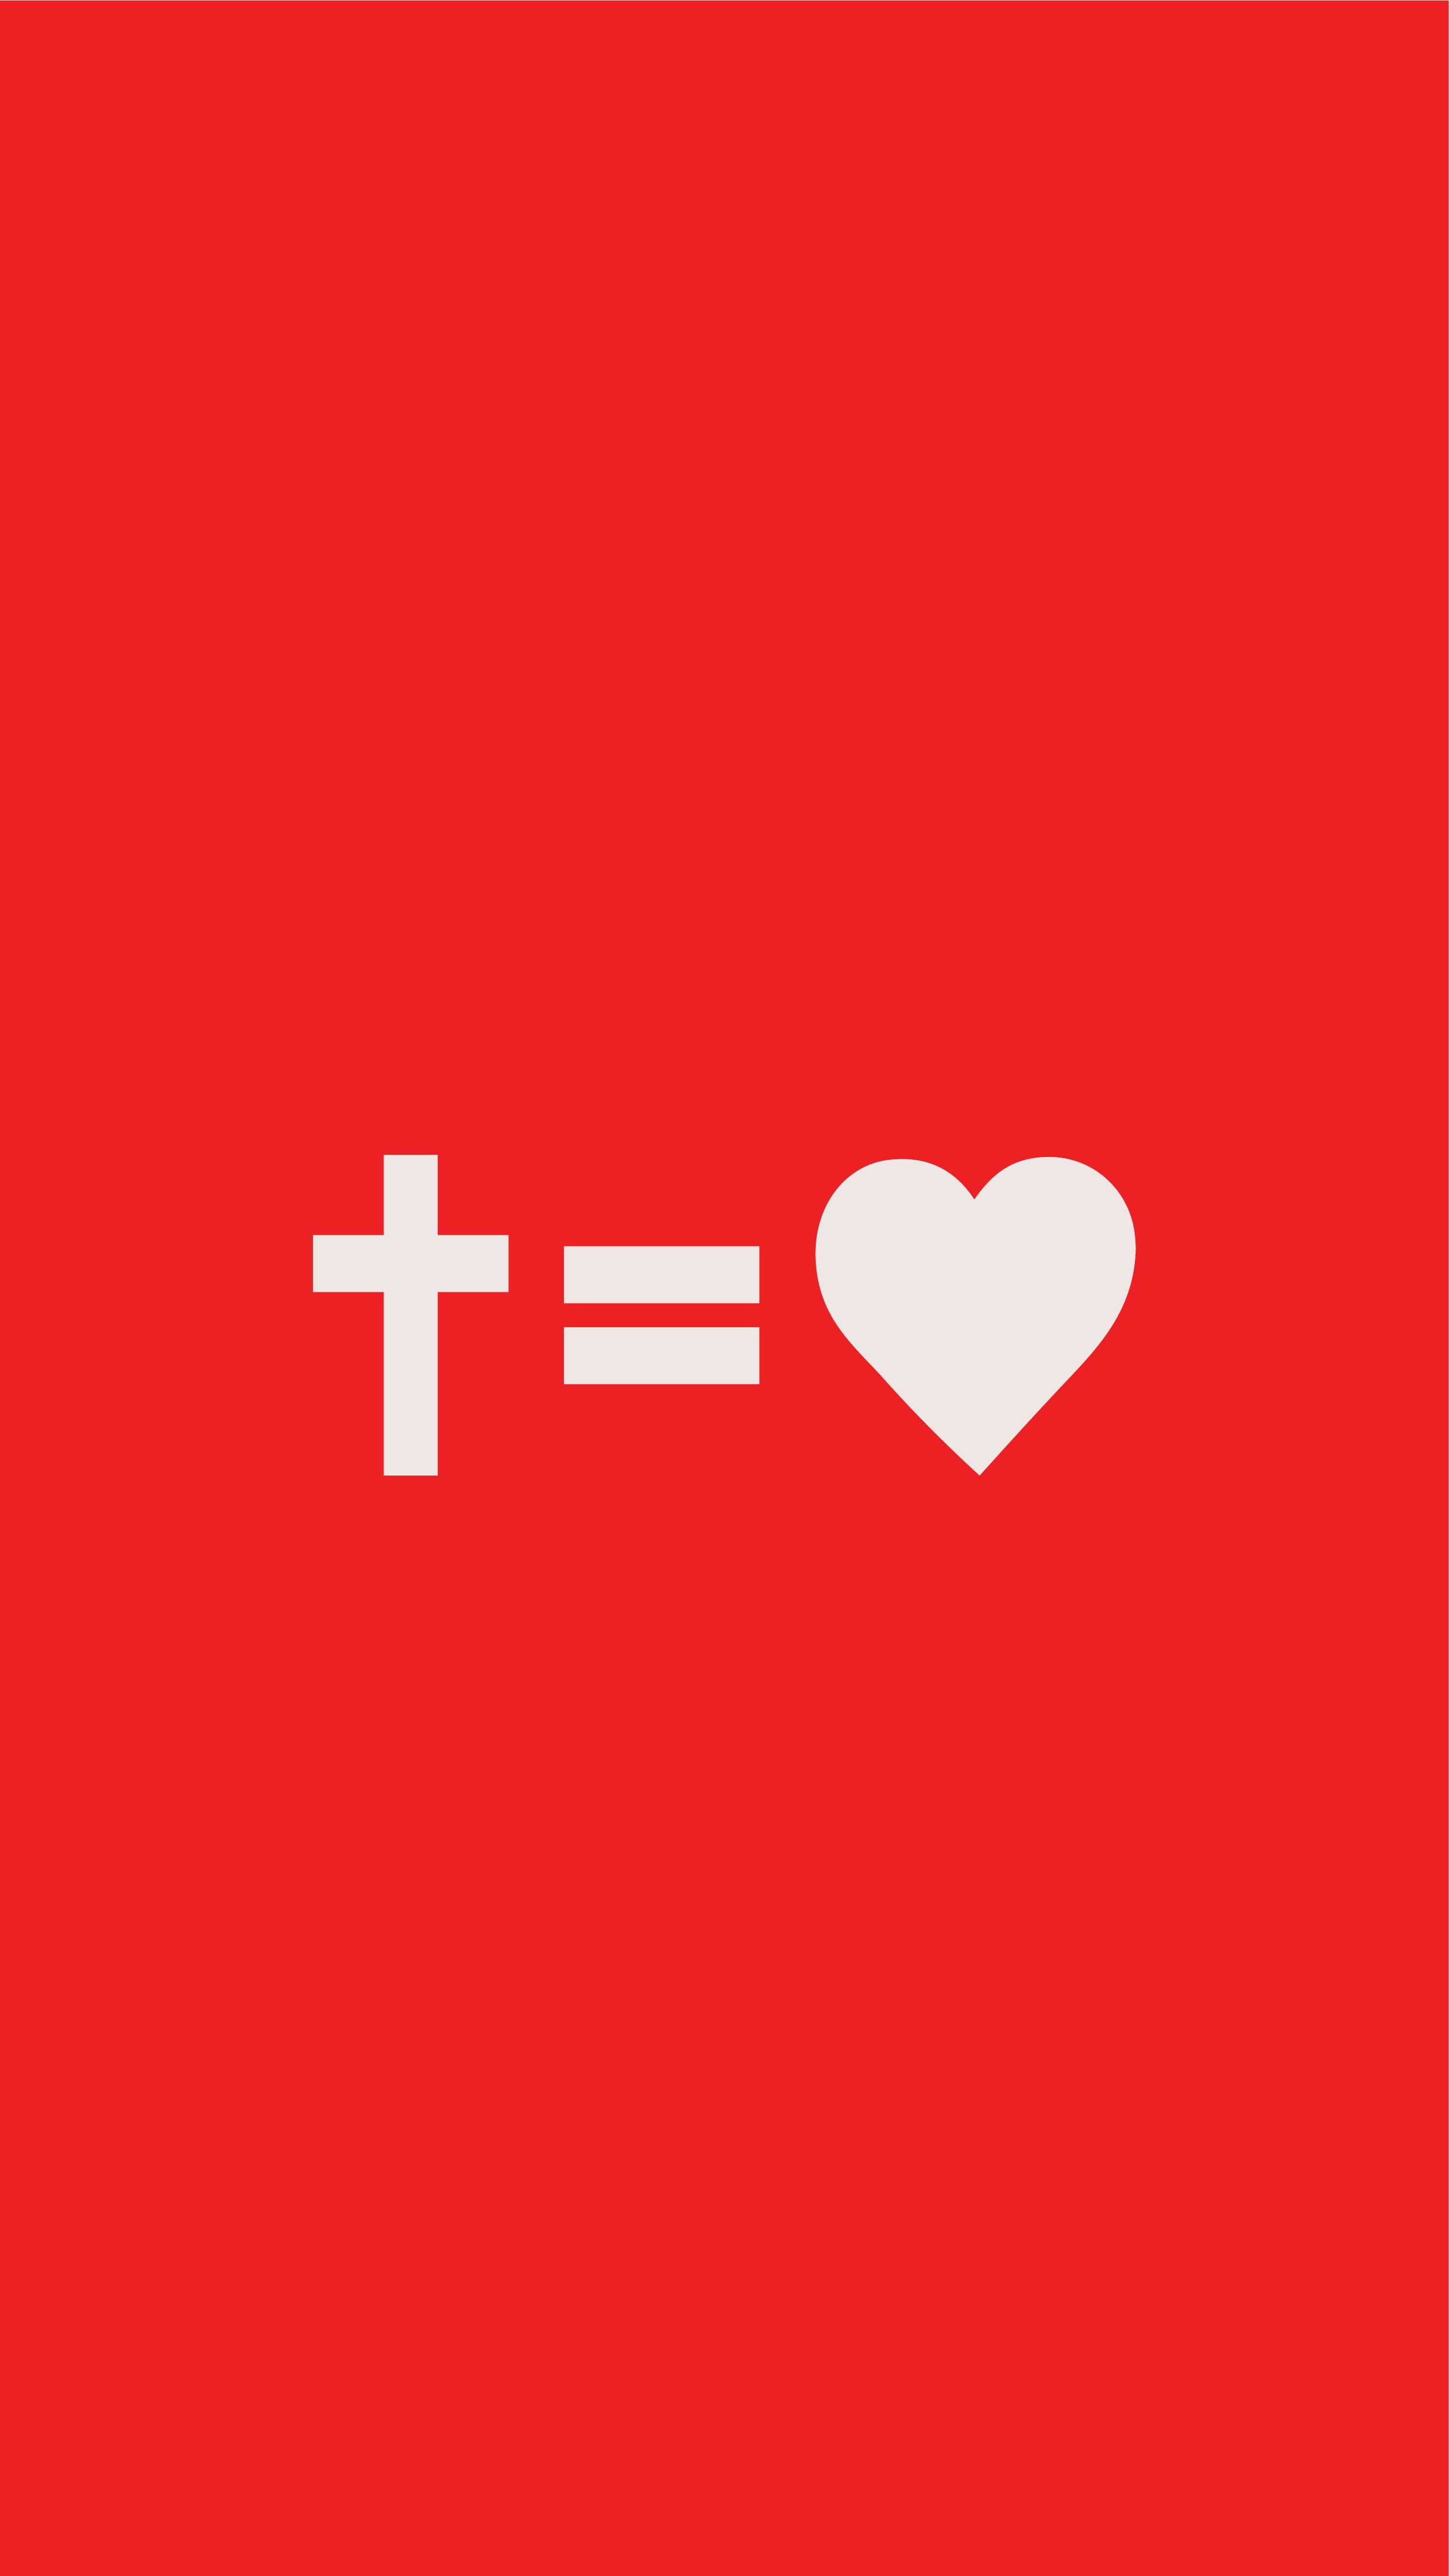 Cross Equals Love, Invite Cards, Banners, Social Media